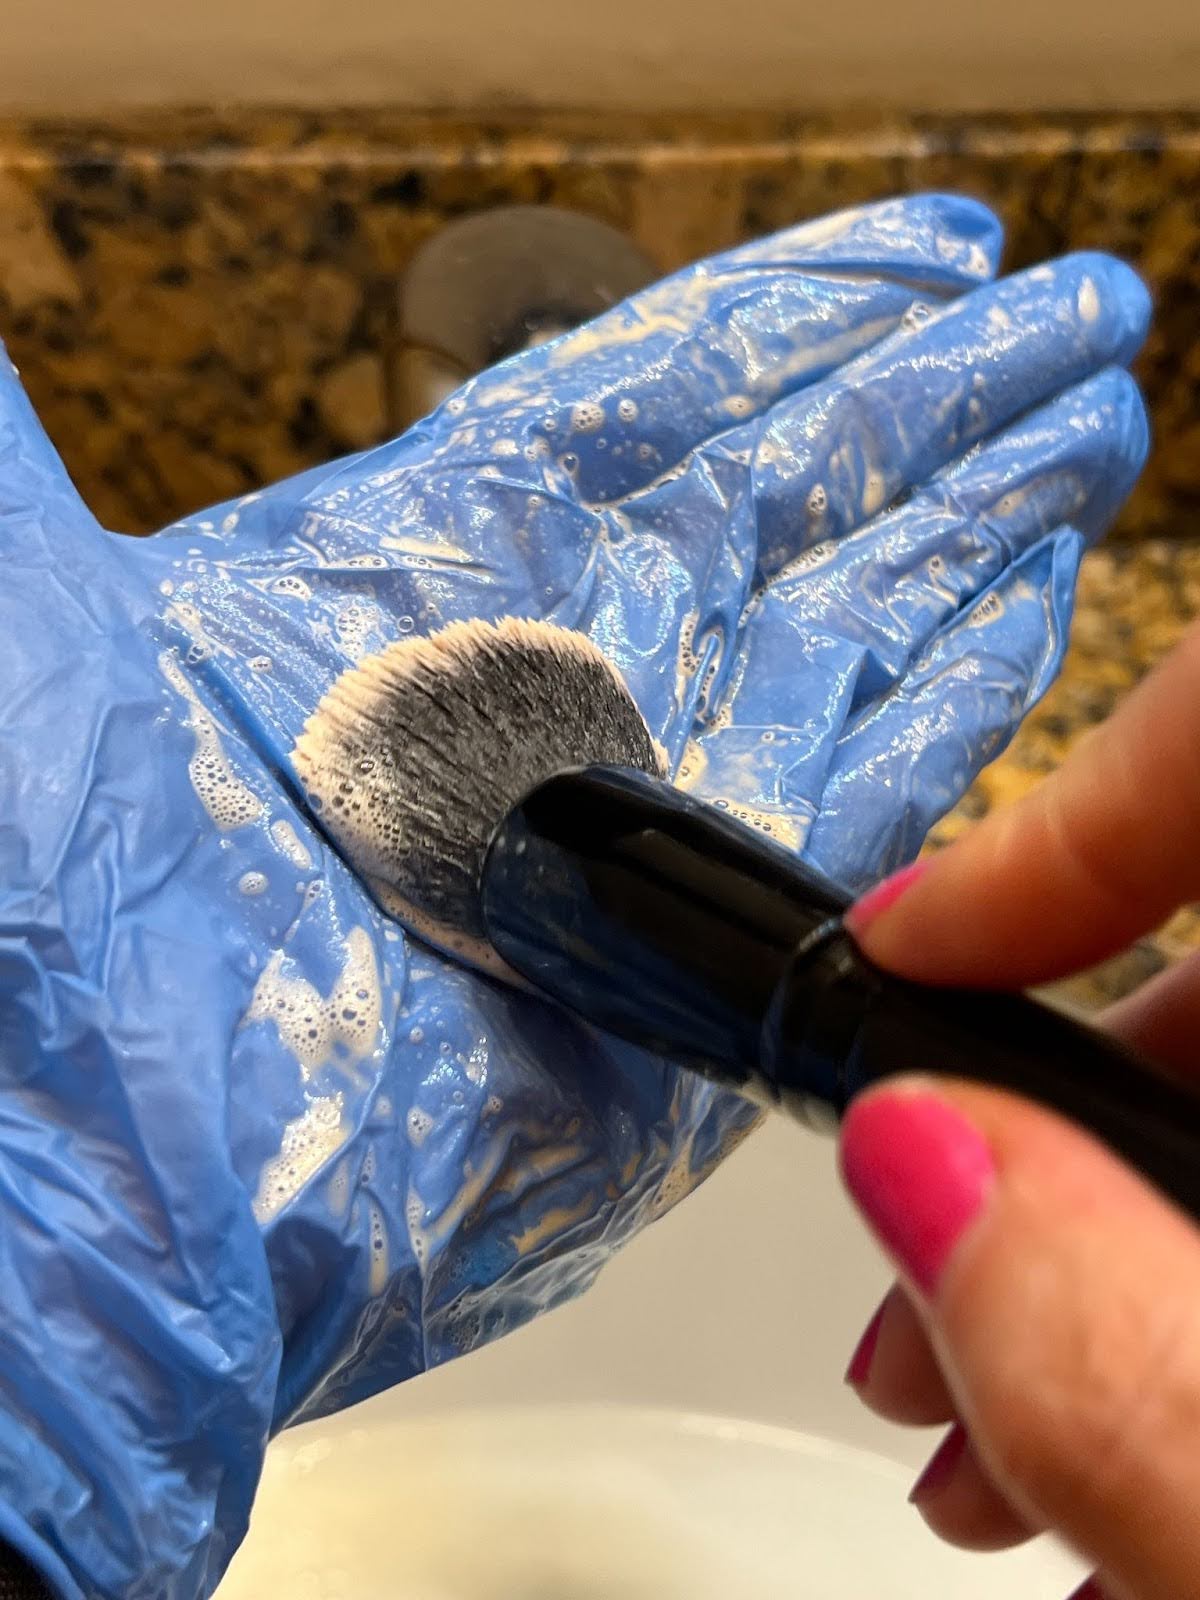 Gently massage the soap into the bristles by swirling the brushes on a silicone brush mat or the palm of your hand. If you have sensitive skin, wear a latex glove as shown.